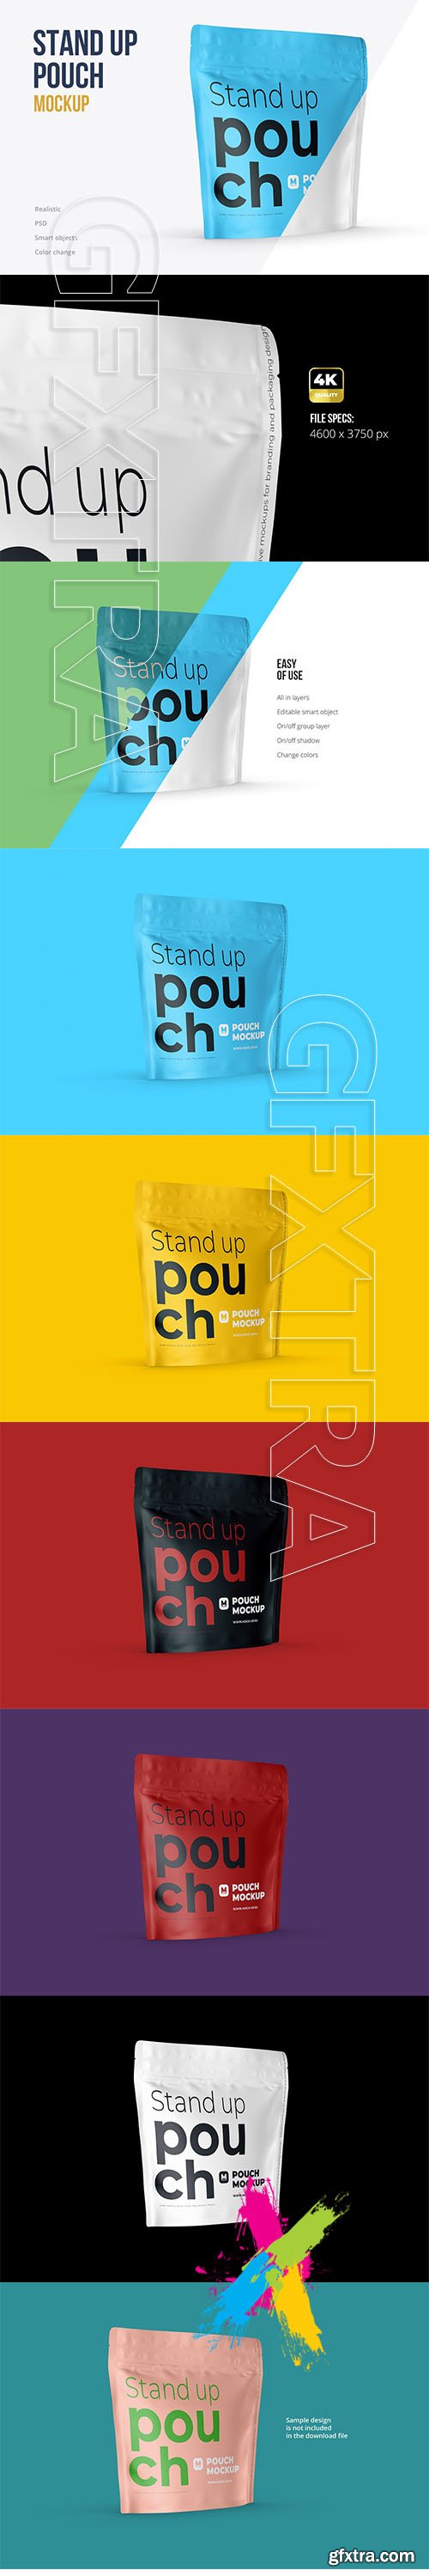 CreativeMarket - Stand-up Pouch Mockup (square) 5078775